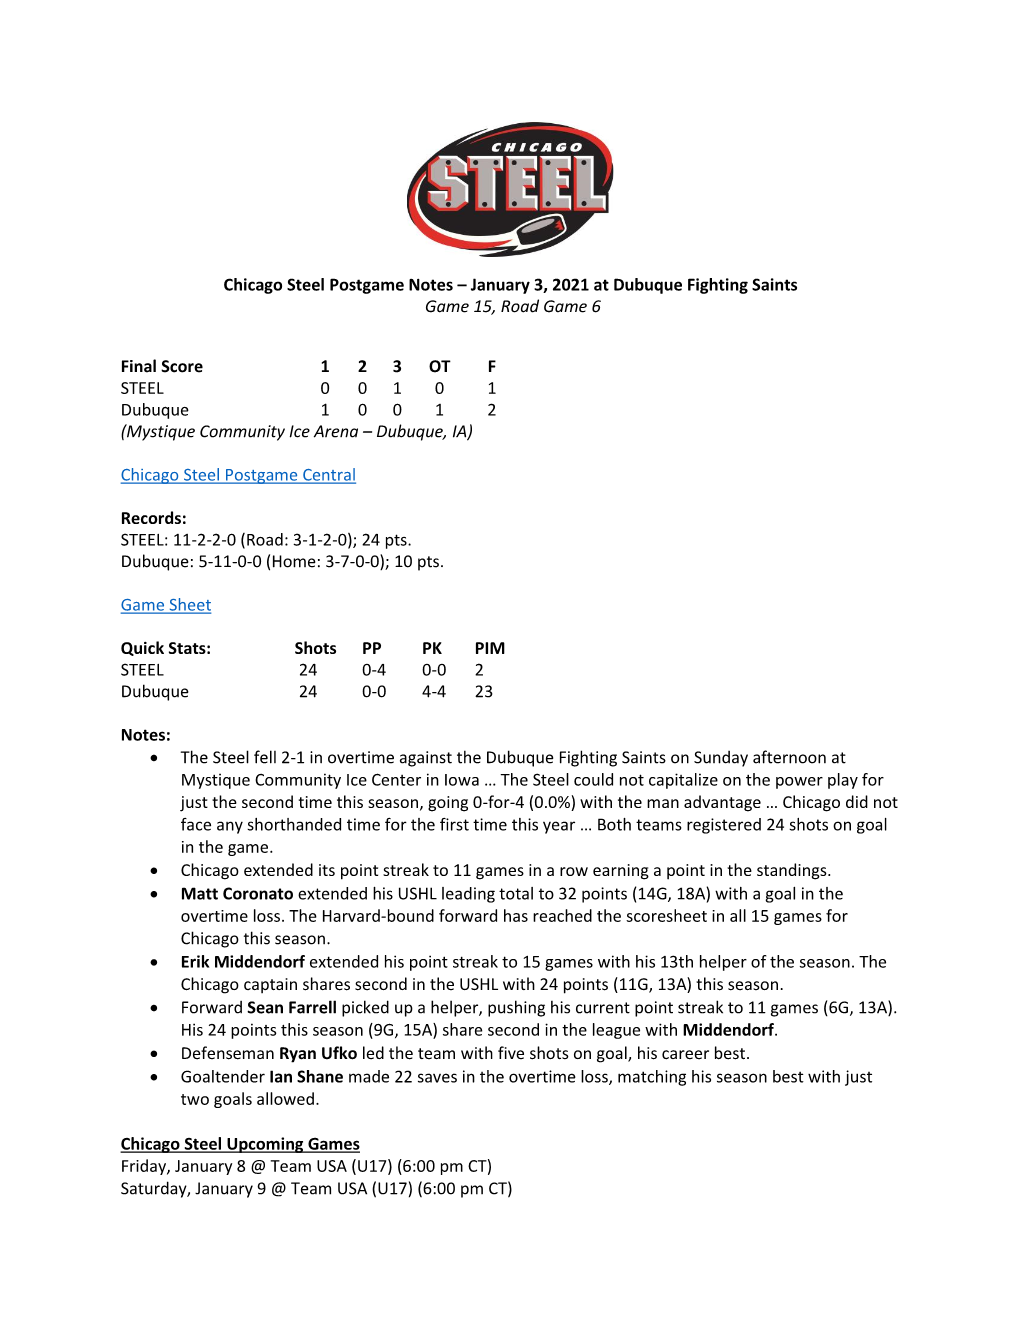 Chicago Steel Postgame Notes – January 3, 2021 at Dubuque Fighting Saints Game 15, Road Game 6